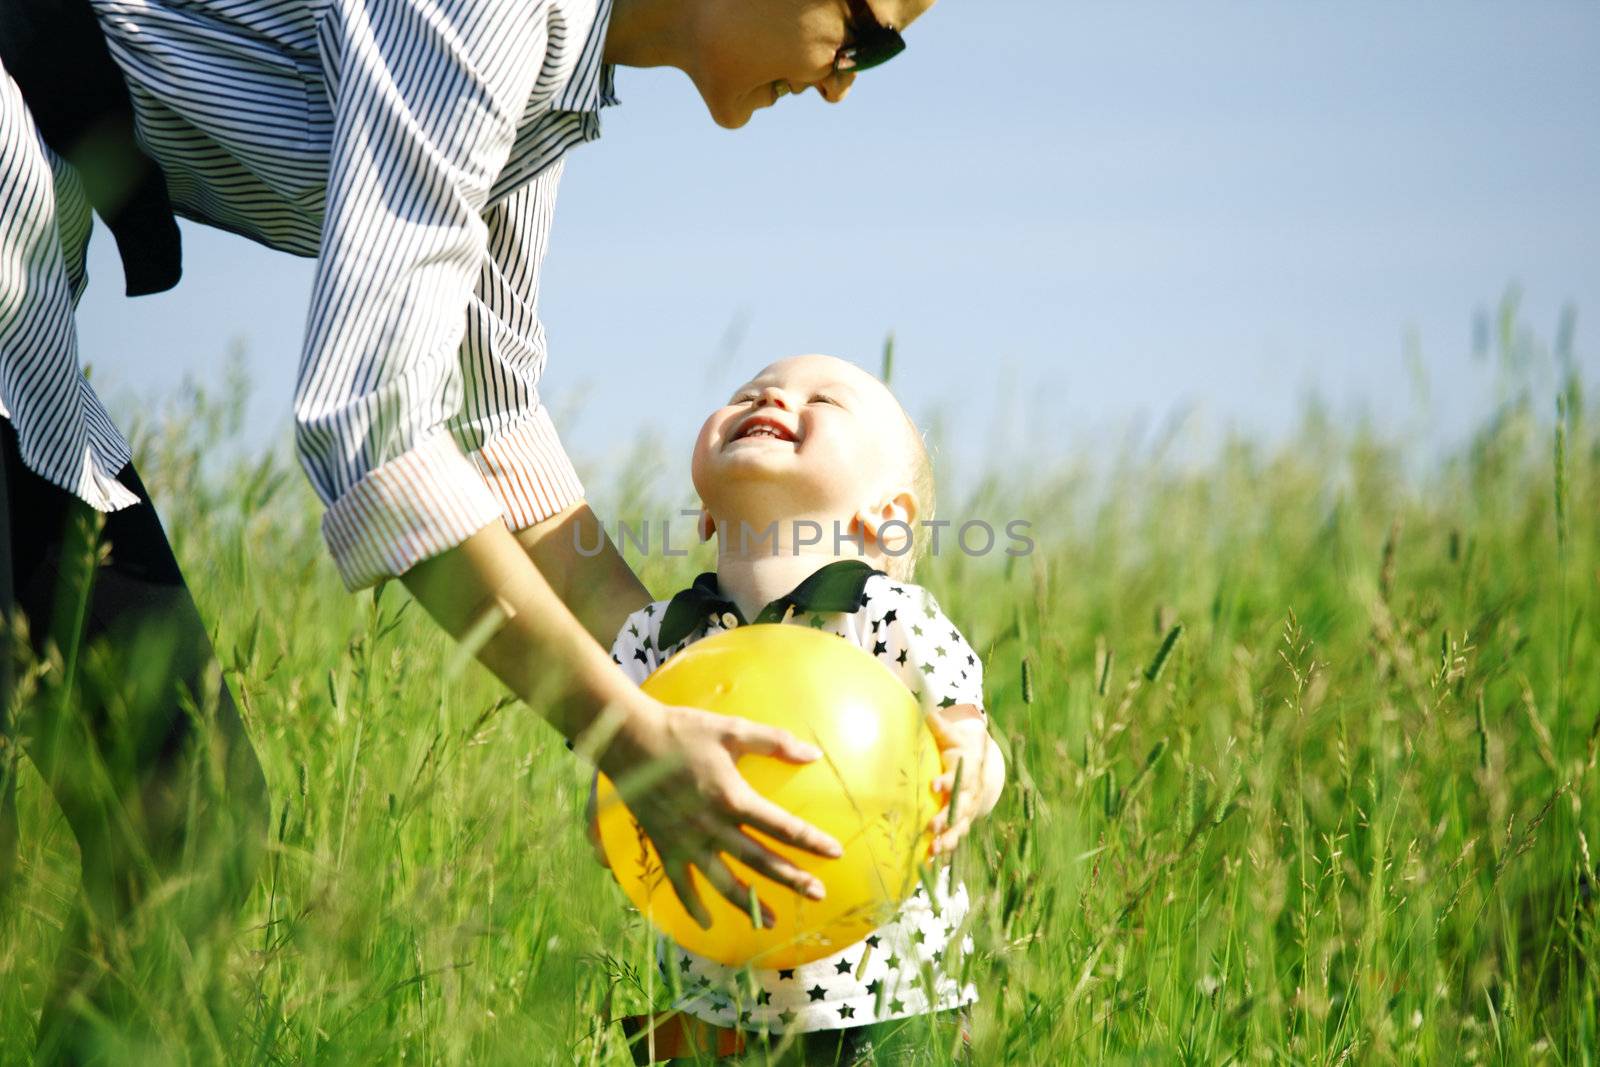  little boy play in green grass with yellow ball